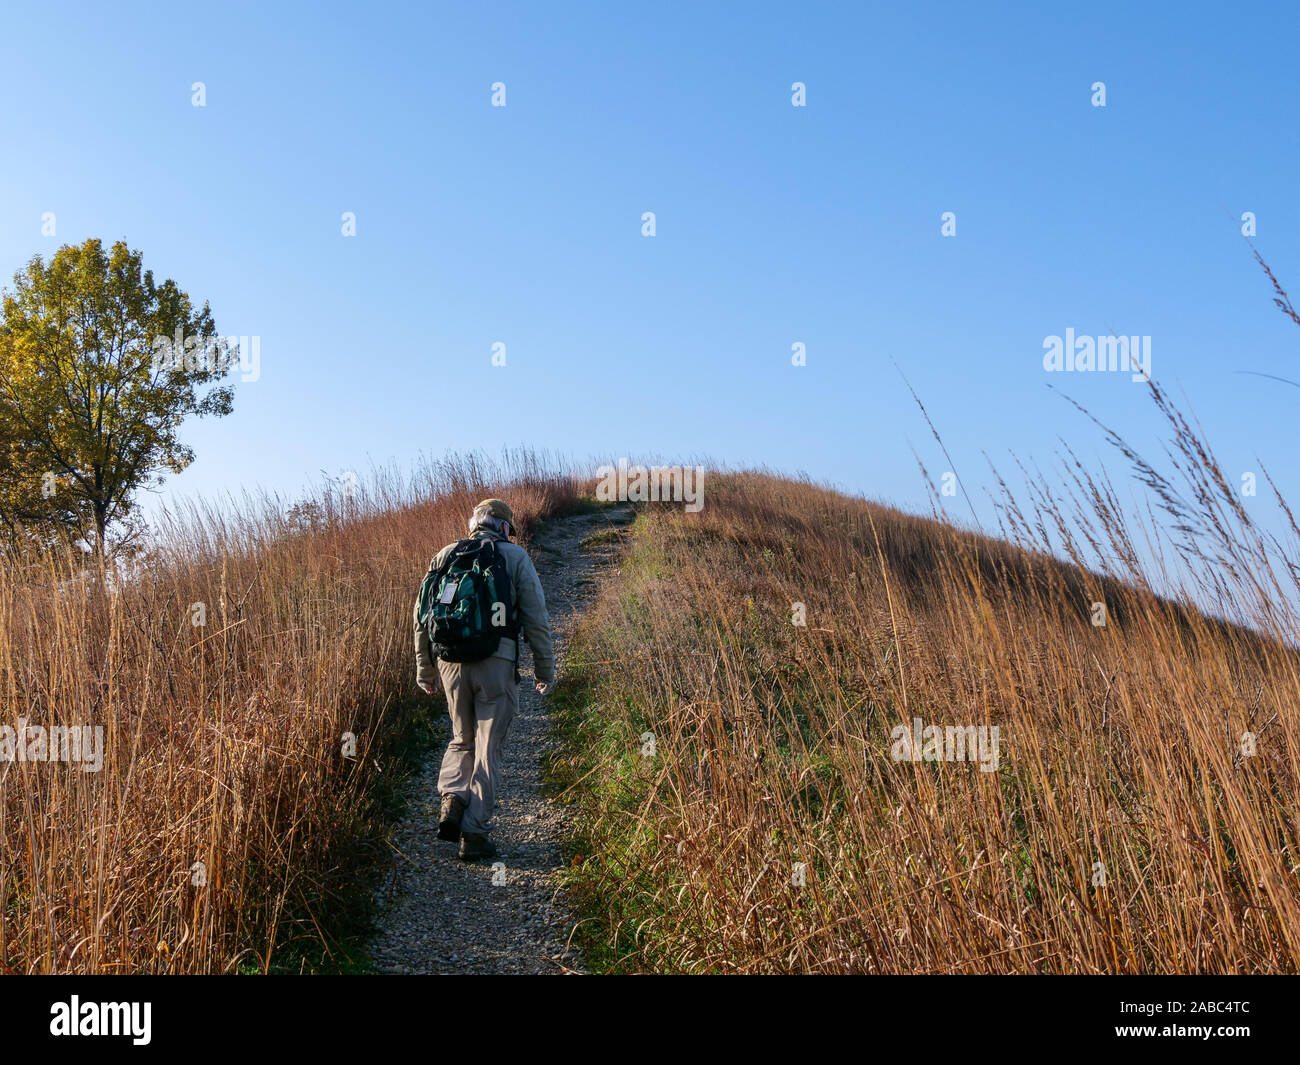 Hiker climbing Camelback Kame. Glacial Park, McHenry County, Illinois. A kame is a gravel deposit left by melting glaciers. Stock Photo